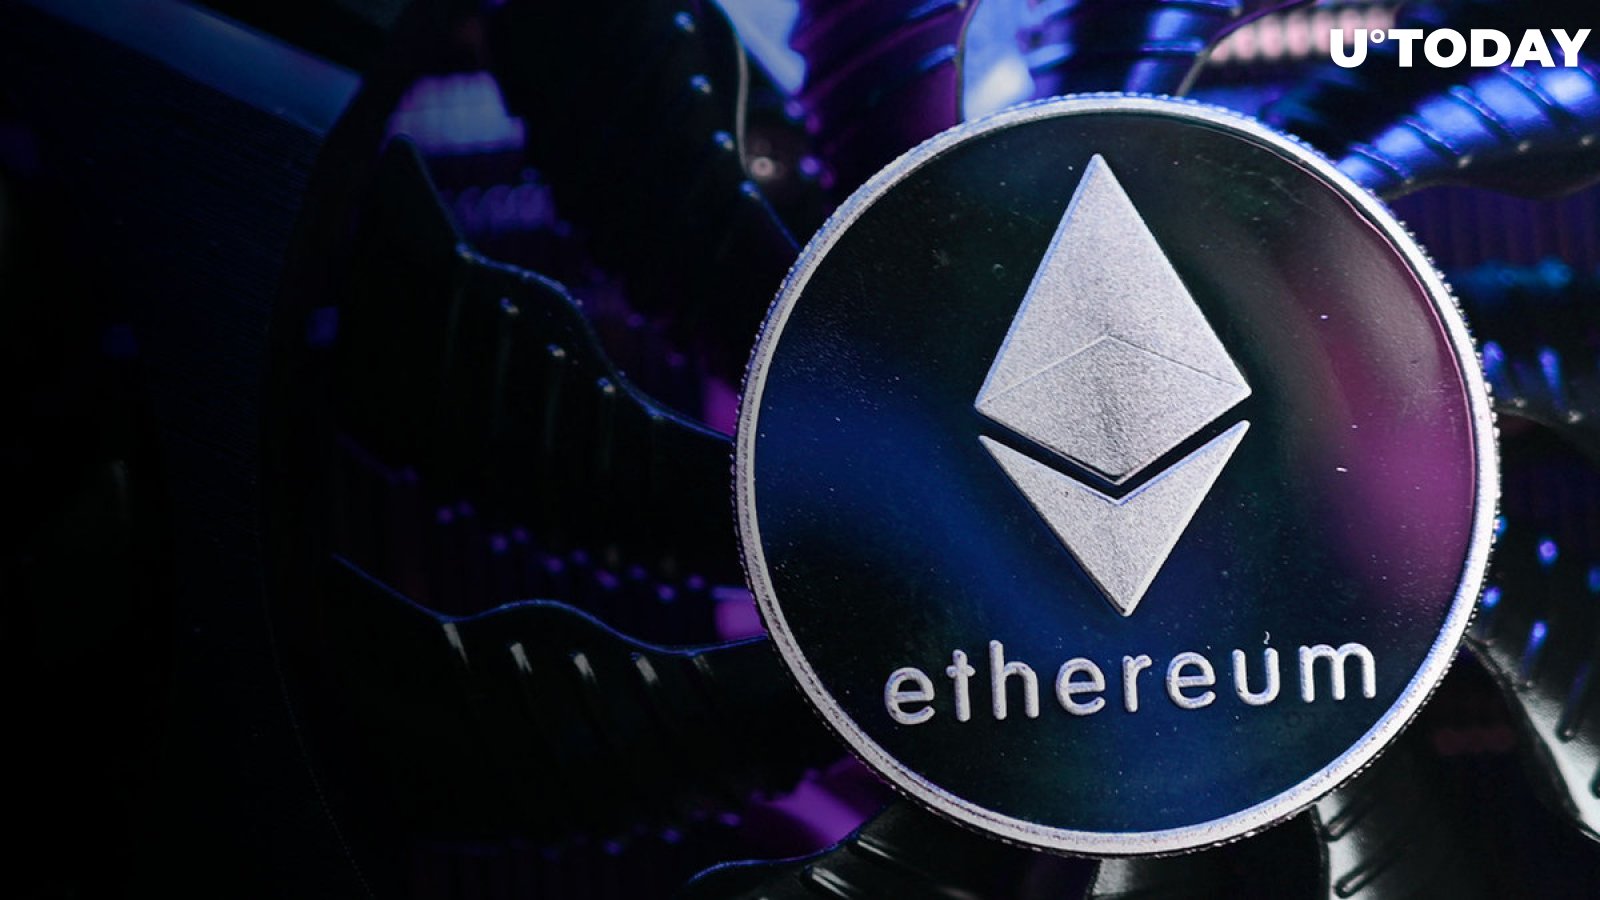 Ethereum (ETH) Drops to Important Support Level, Potential Rally Ahead 